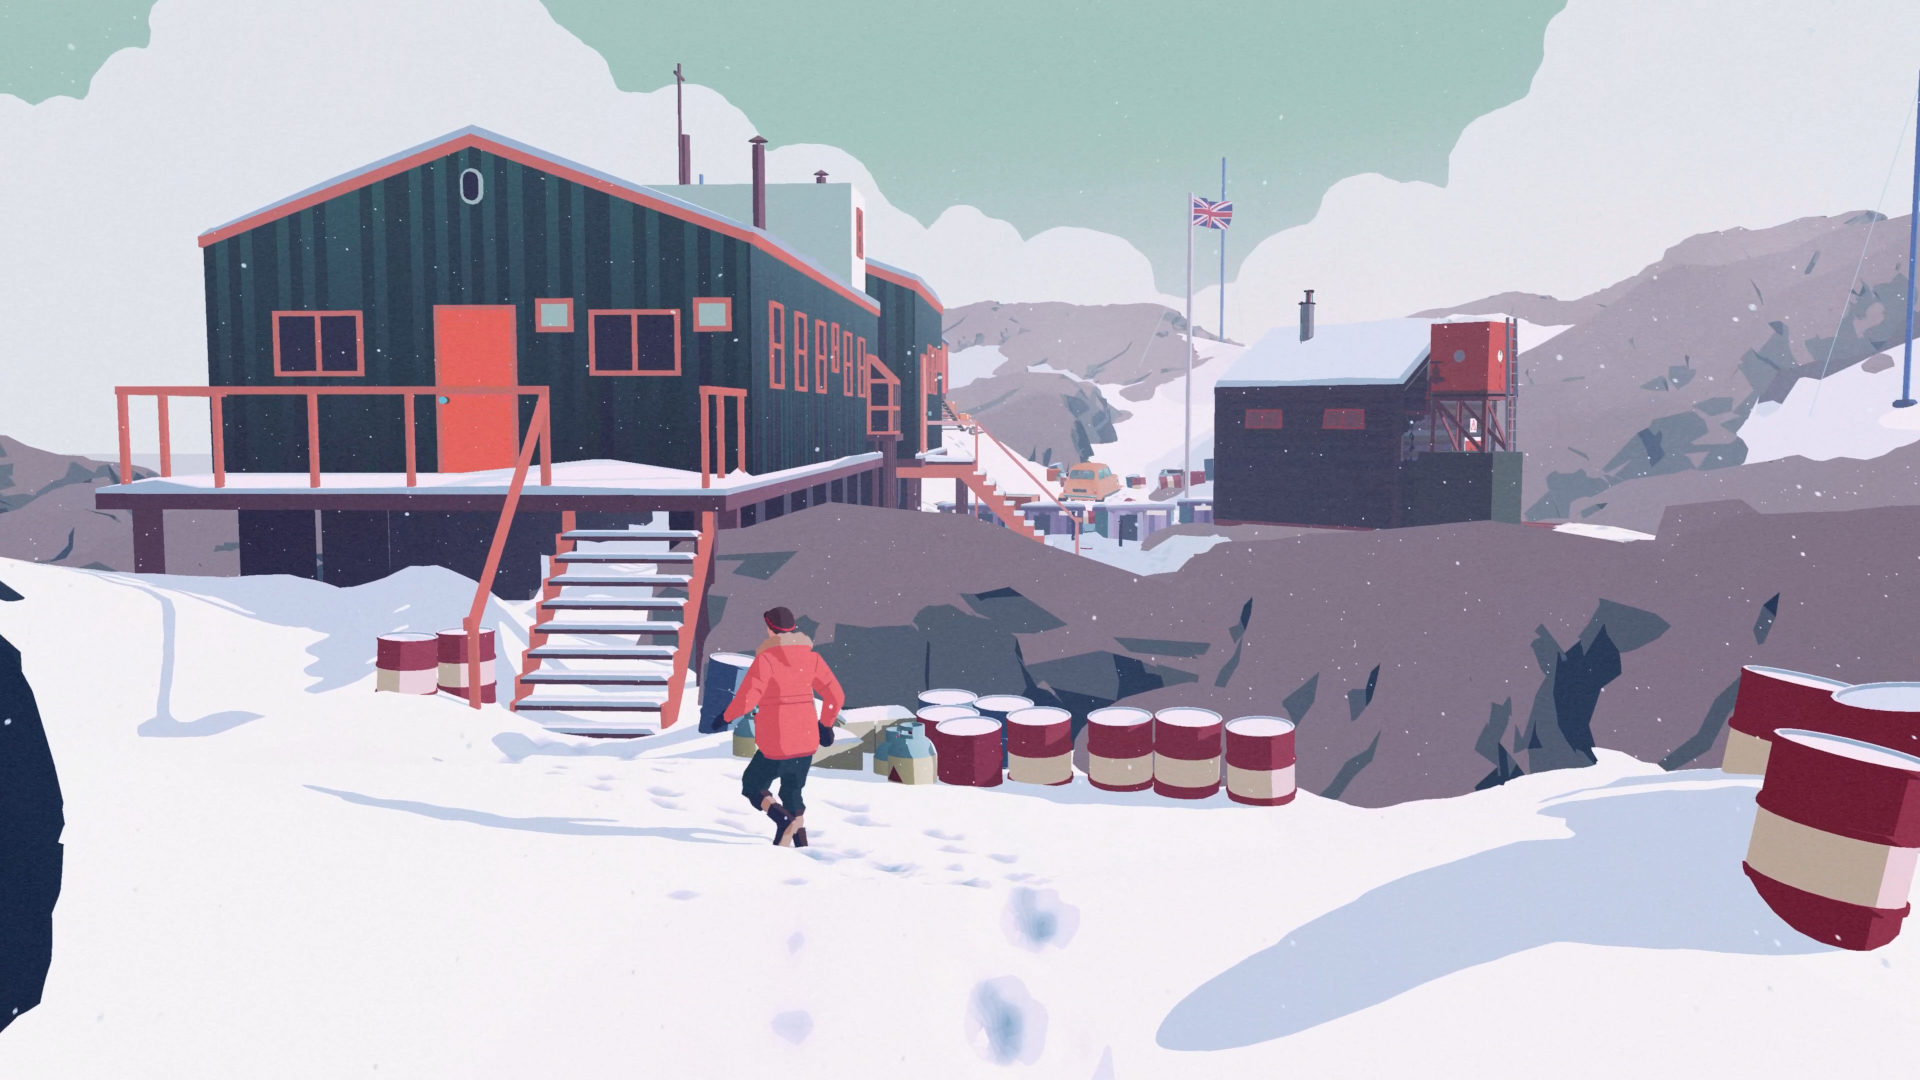 In a snowy mountain landscape, a figure in a red coat approaches a building surrounded by metal barrels. A british flag is in the background.